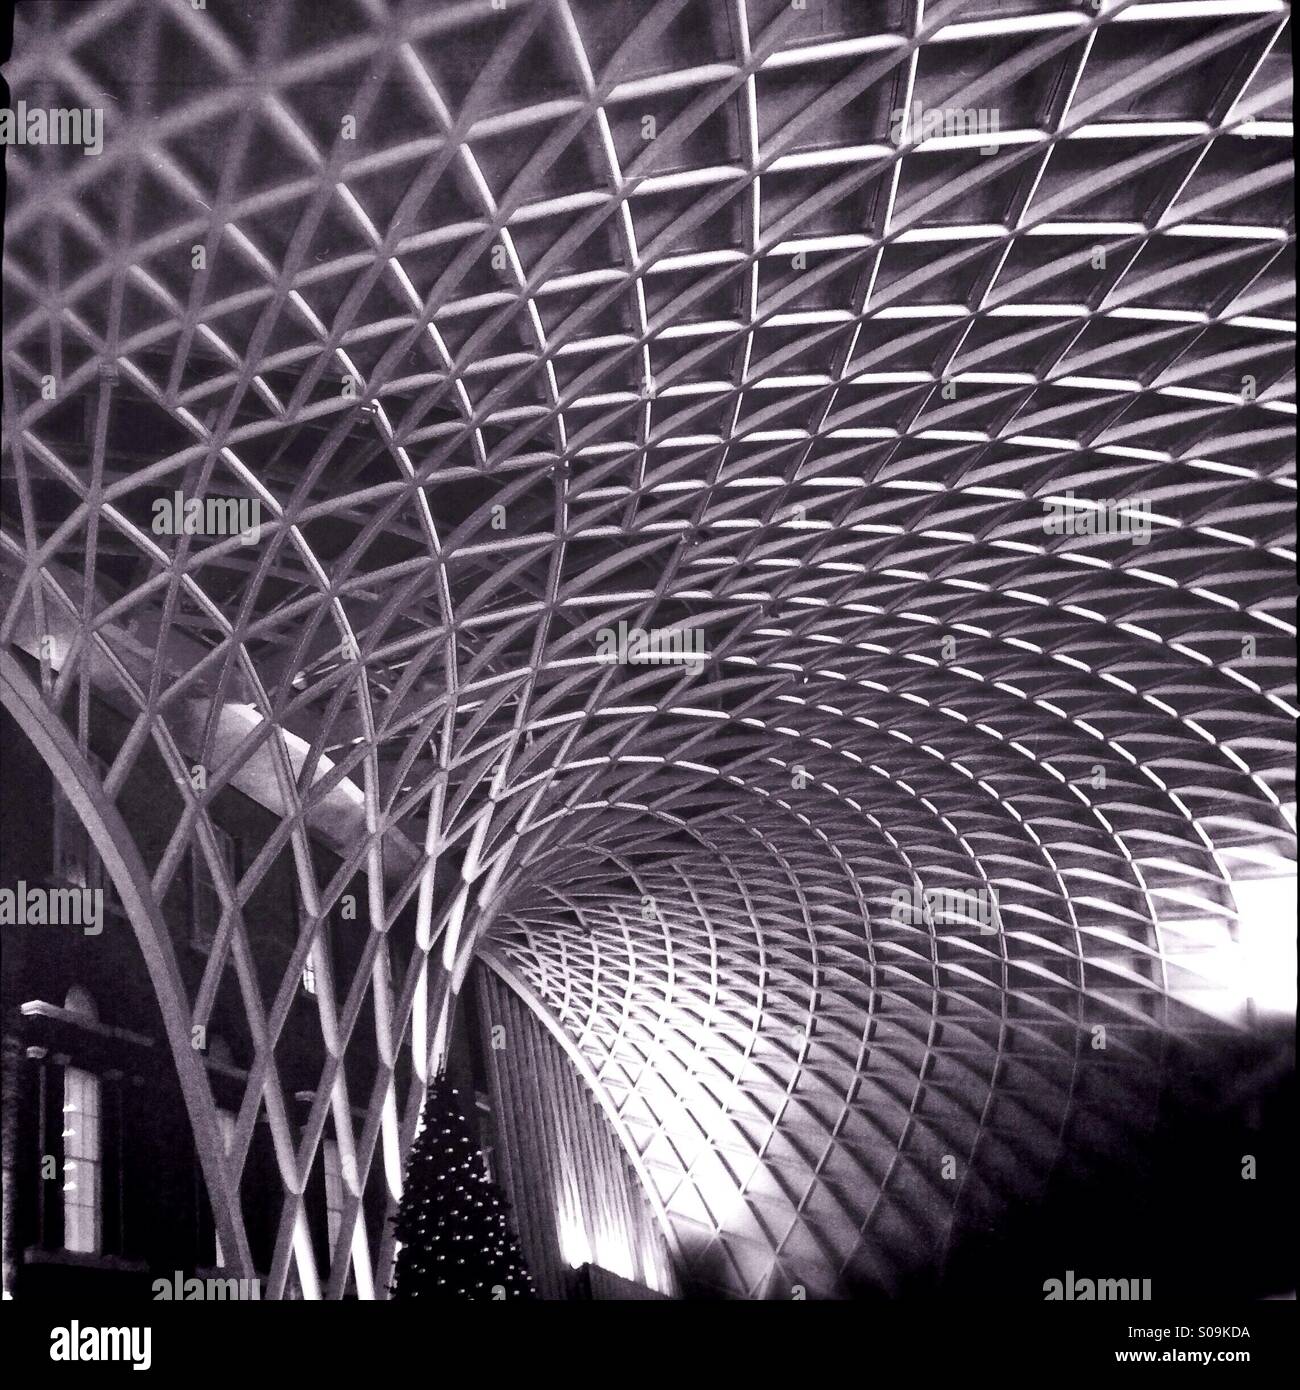 Metal structure of the roof of Kings Cross station in London, England, UK, designed by architects John McAslan and Partners. Stock Photo